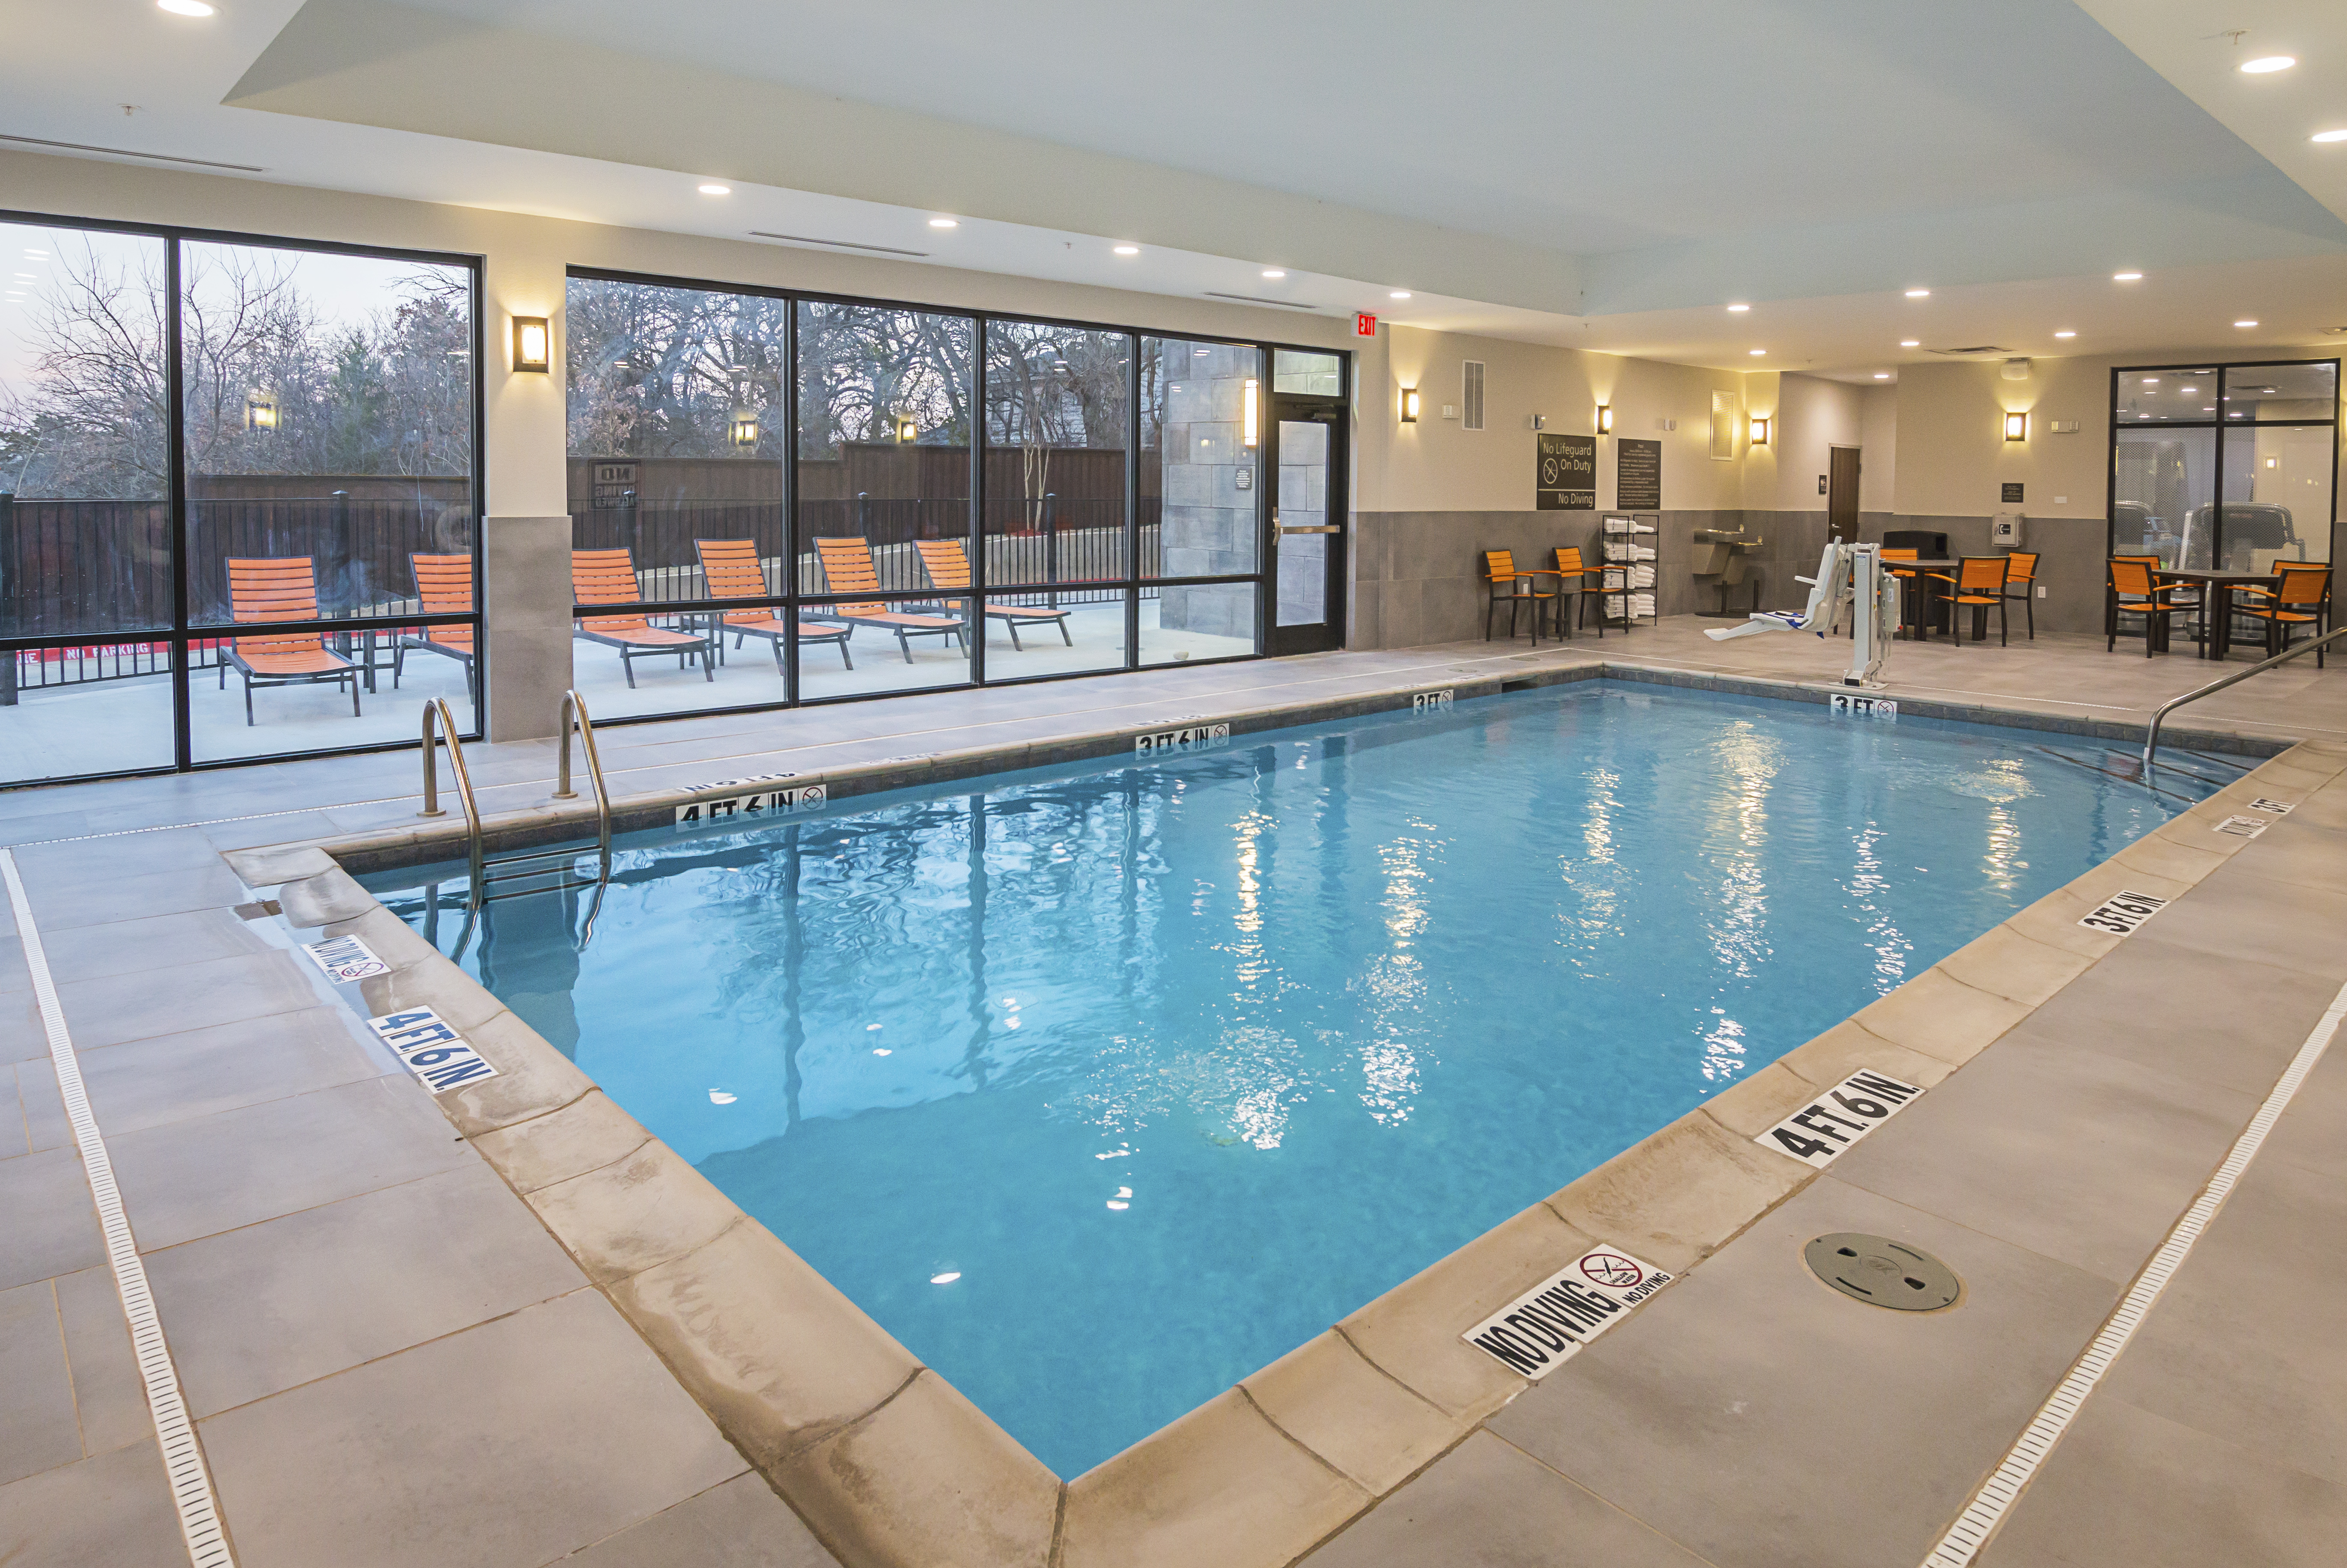 Dallas Texas airport hotel indoor pool
  with handicap accessible lift and outdoor patio with lounge chairs 